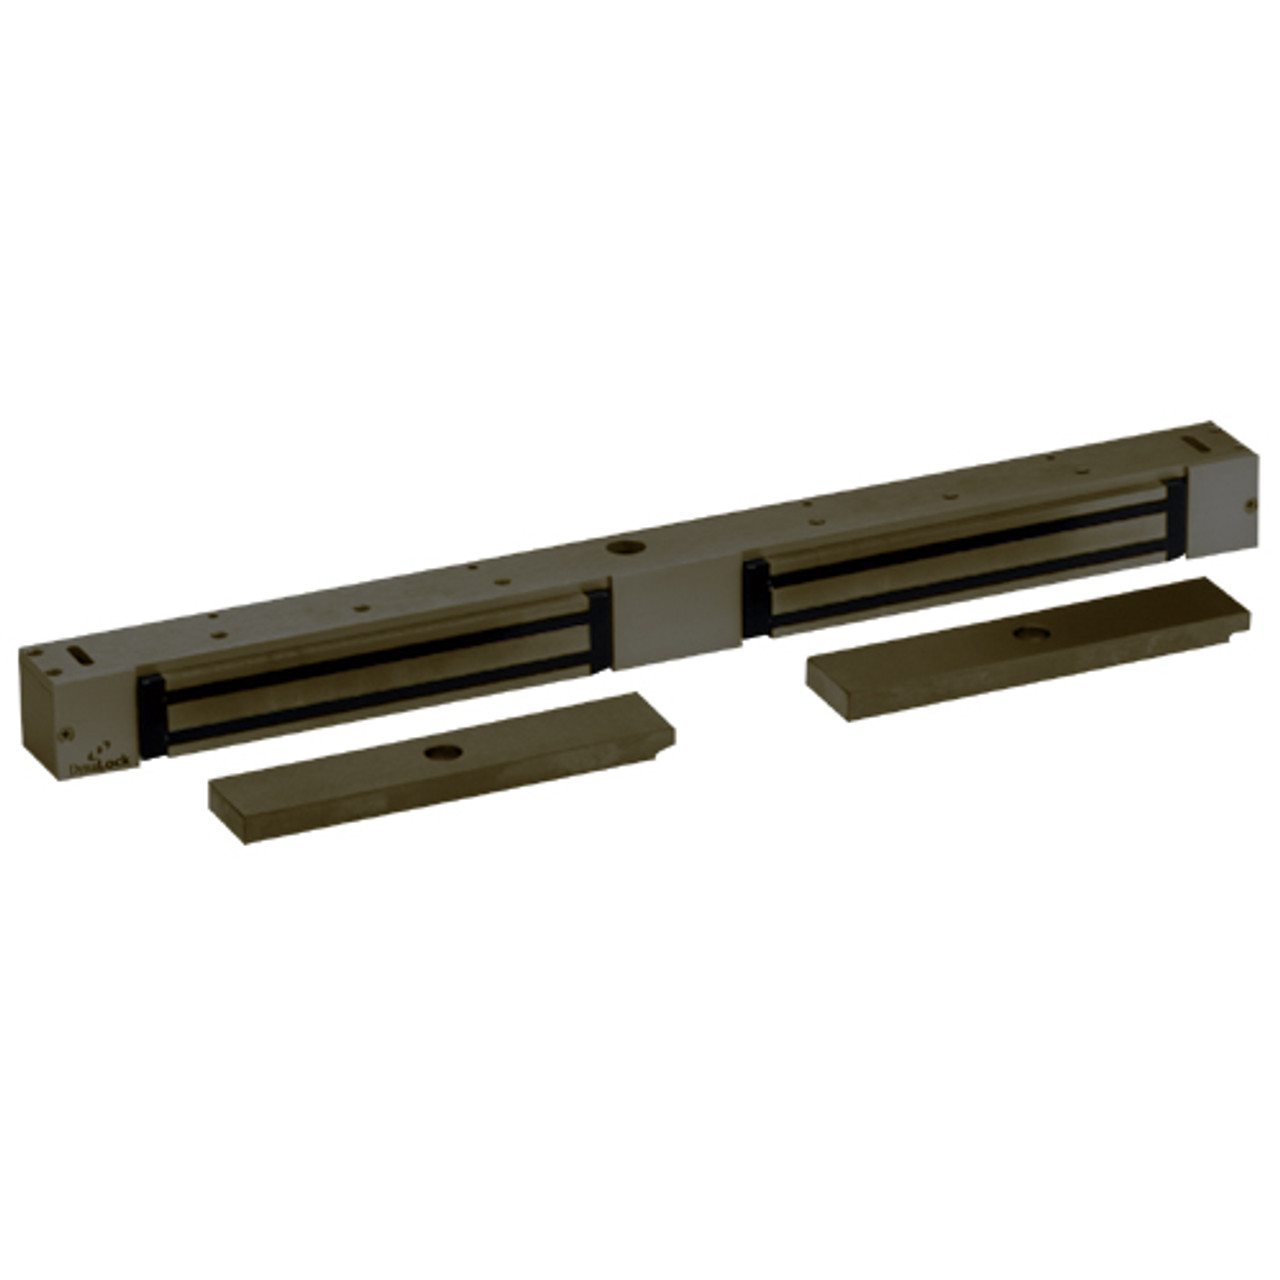 2268-20-US10B-ATS DynaLock 2268 Series Double Classic Low Profile Electromagnetic Lock for Outswing Door with ATS in Oil Rubbed Bronze